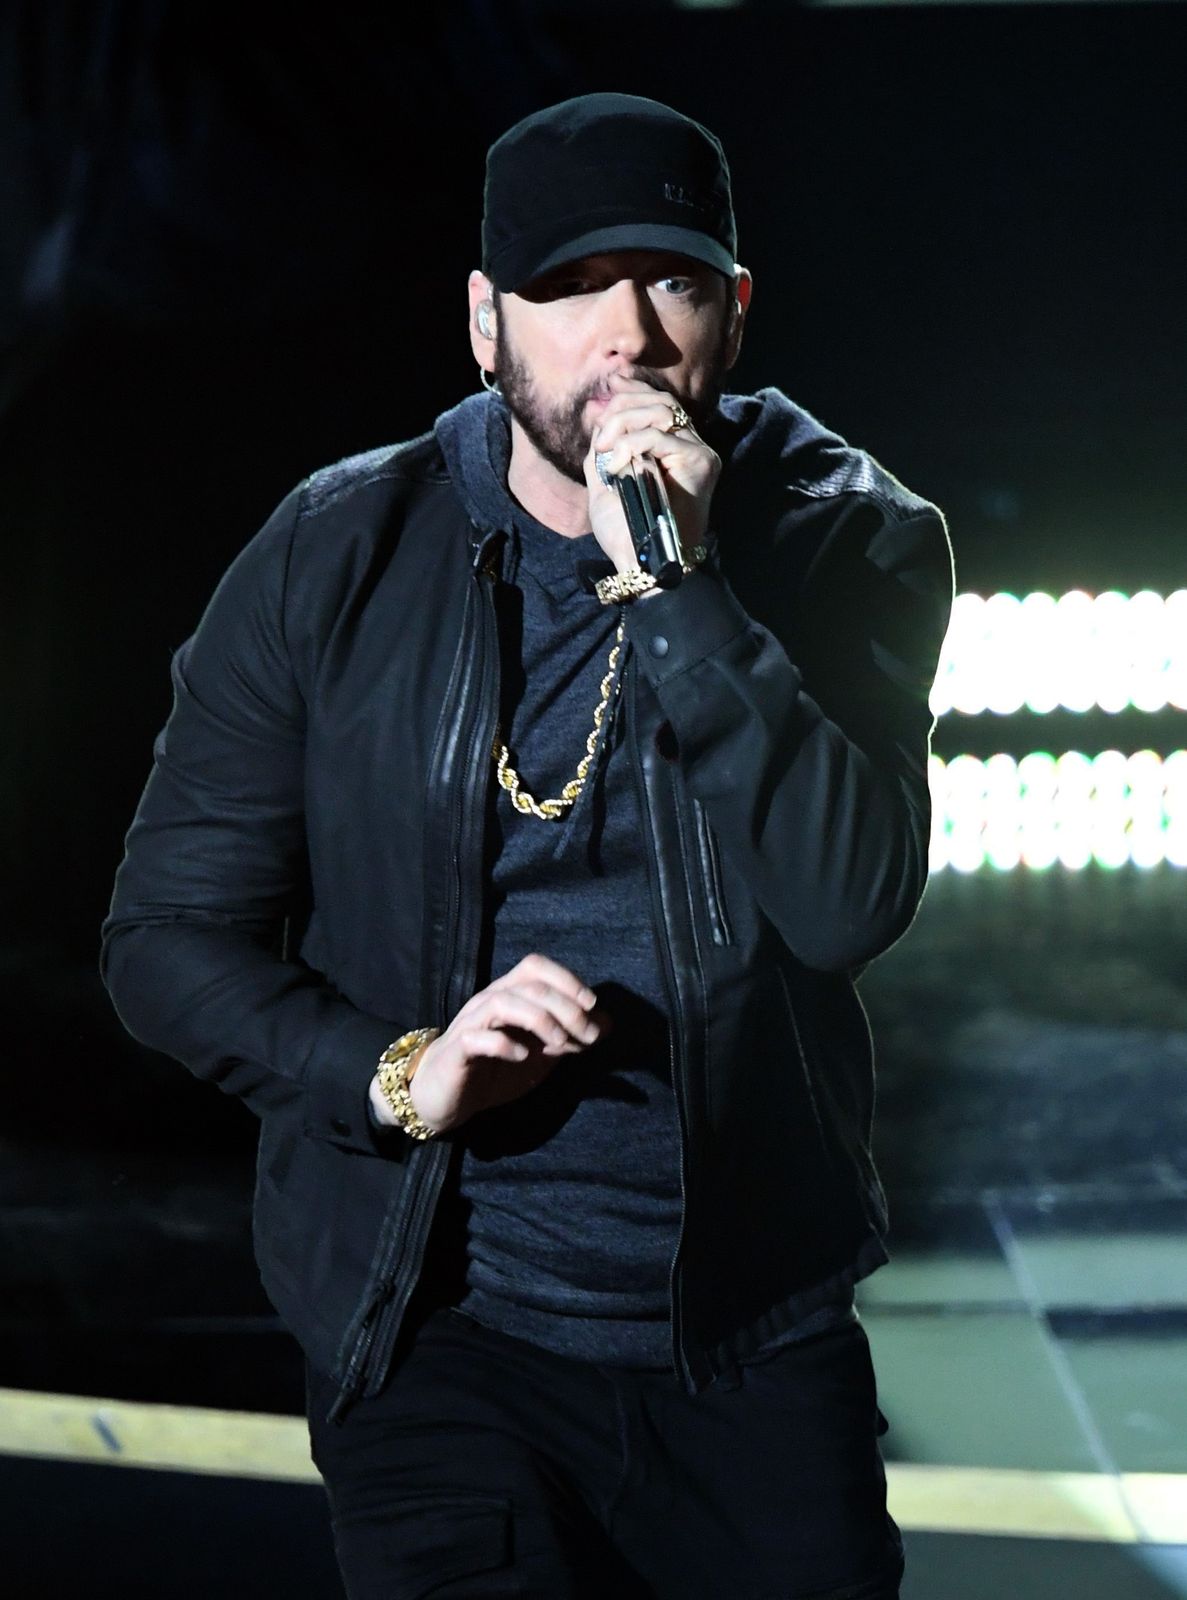 Oscars 2020: Eminem's Surprise Performance To His 8 Miles Song Lose Yourself Gets A Standing Ovation